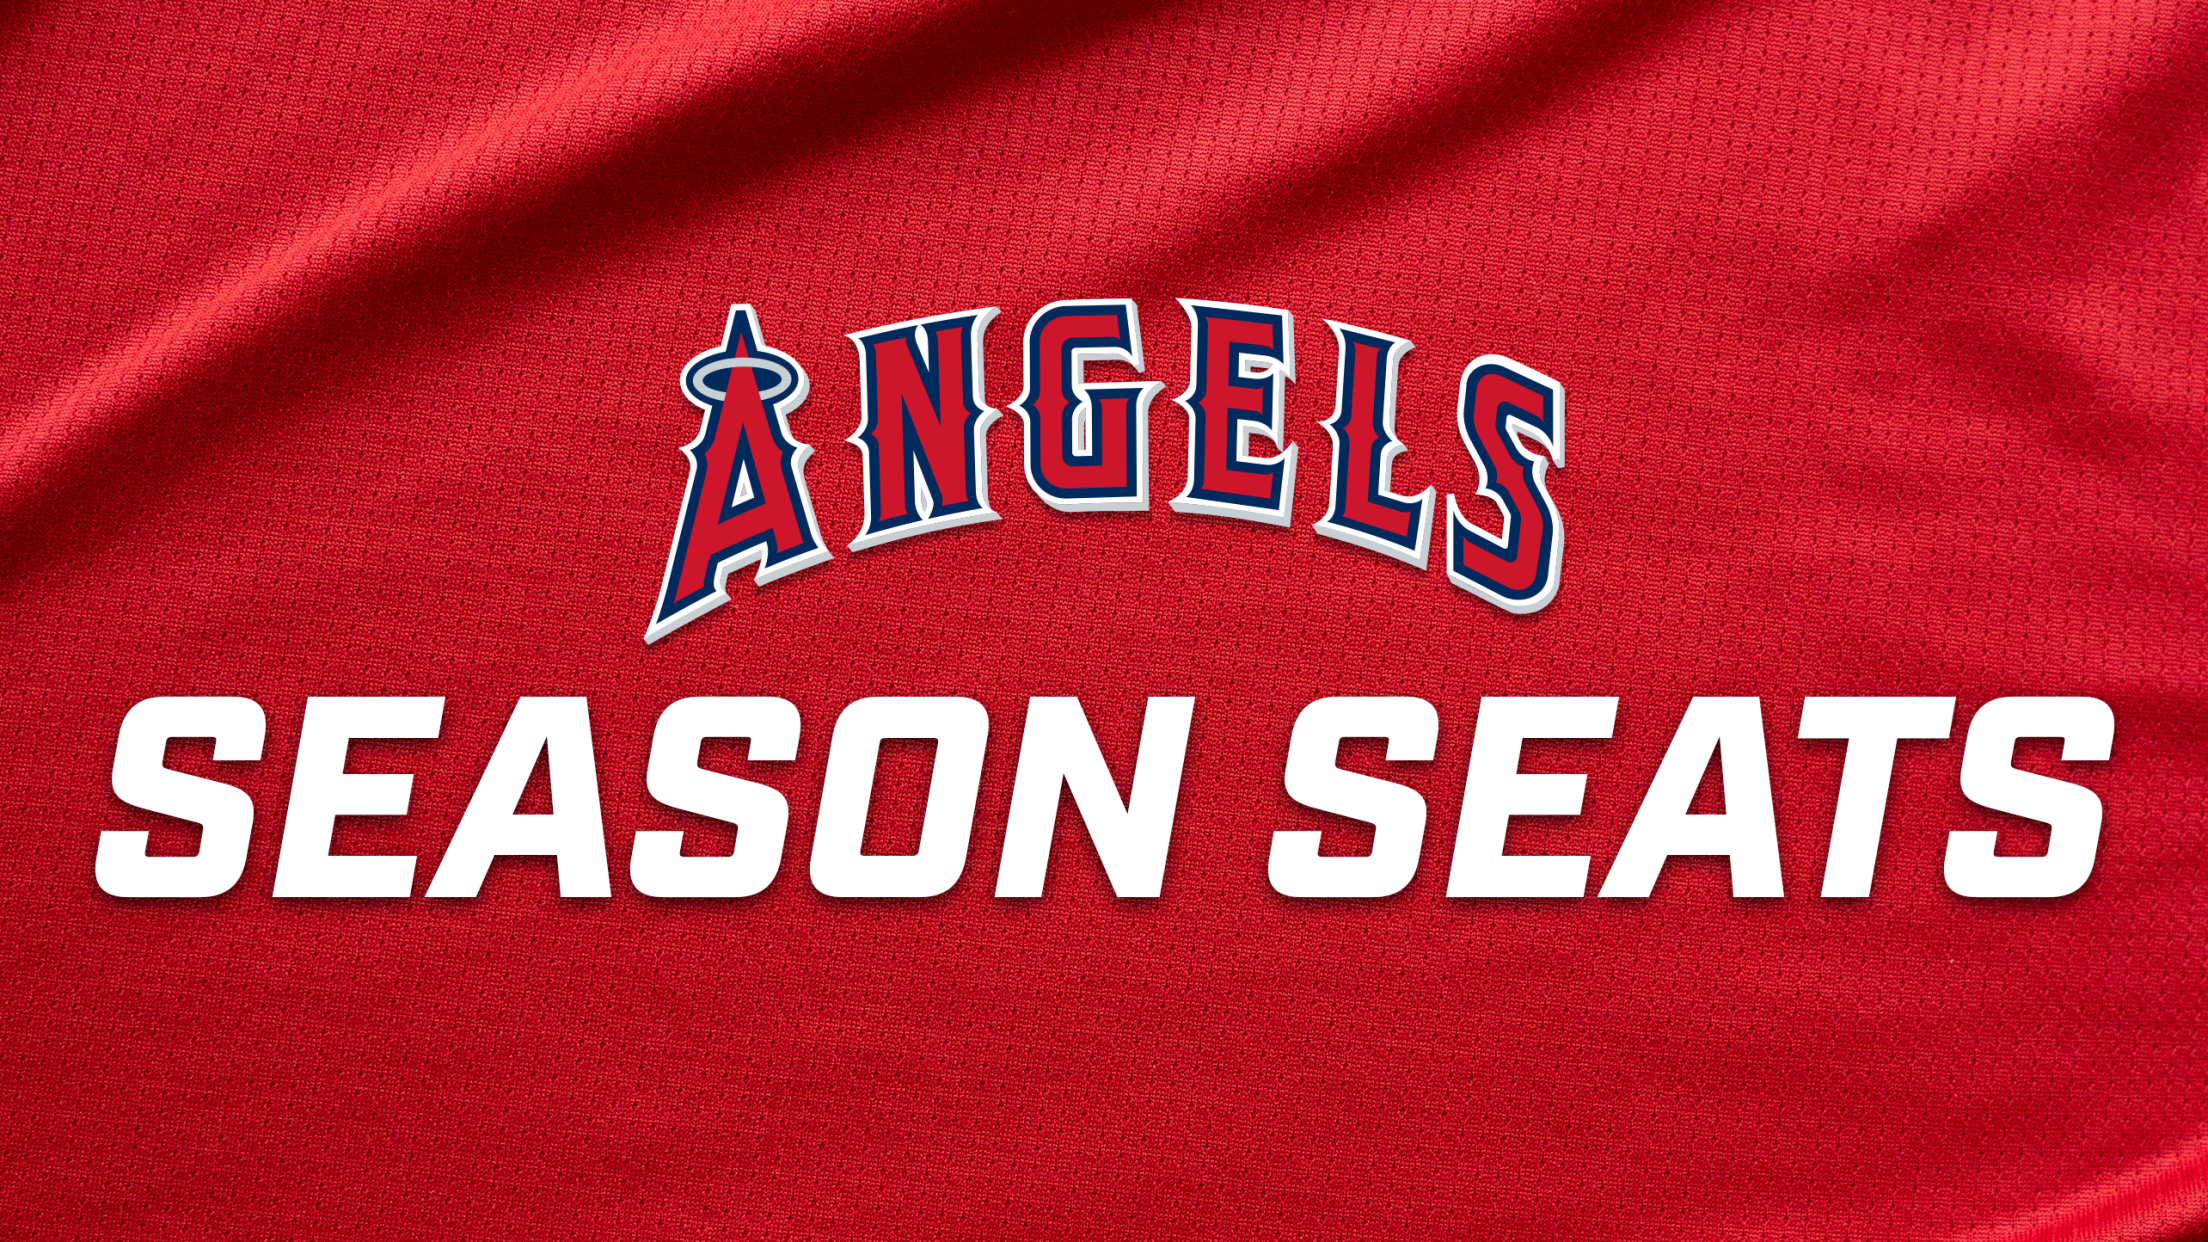 Anaheim Angels For Men Gifts & Merchandise for Sale